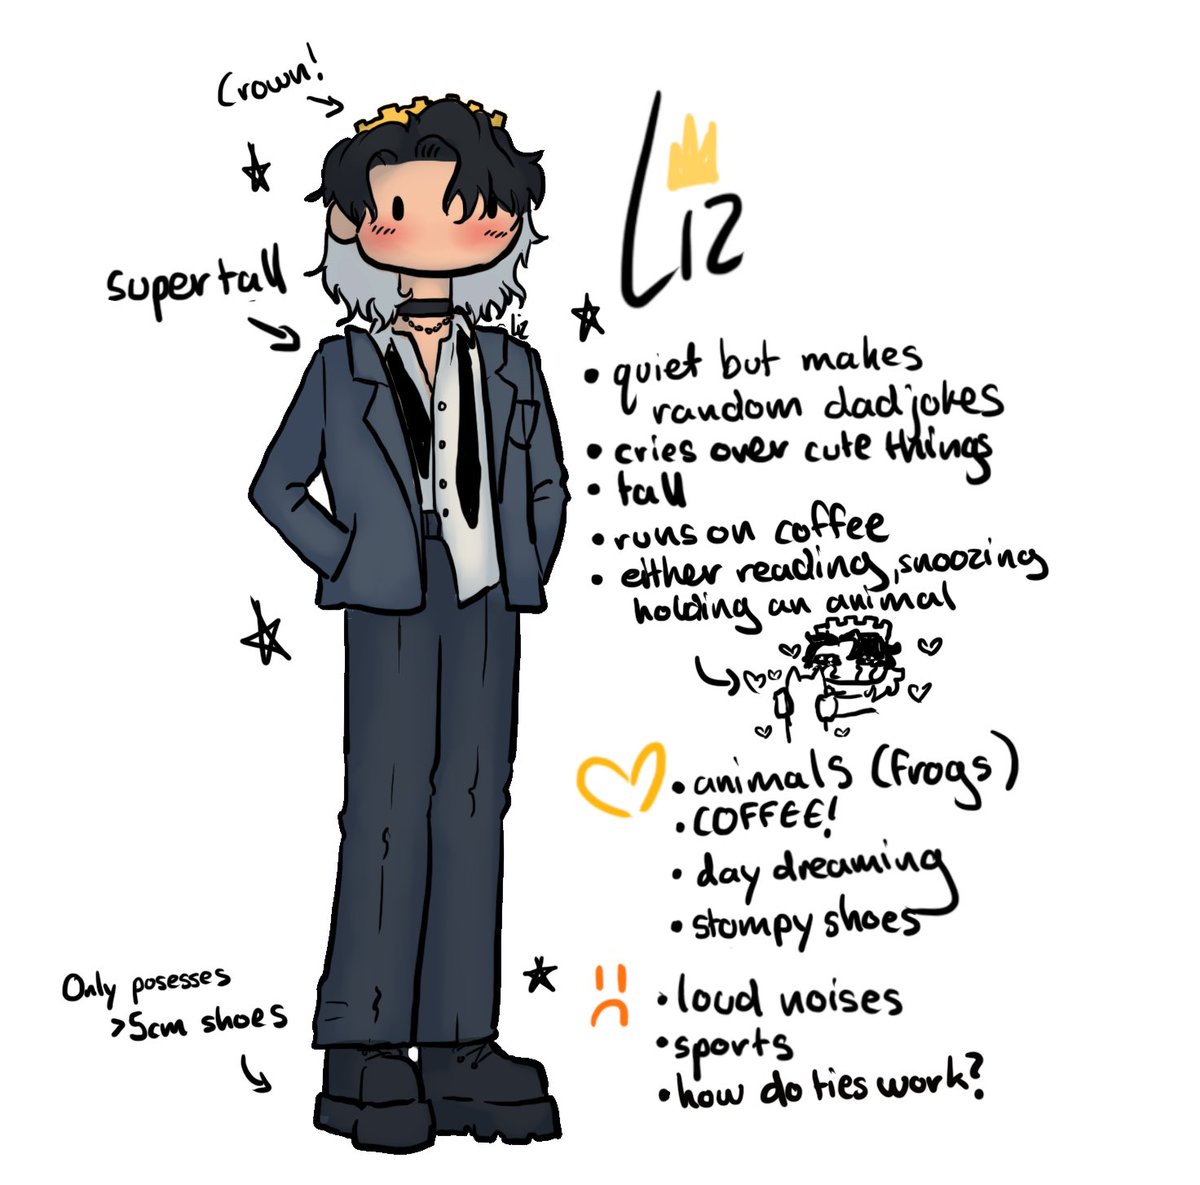 Aaah the trend is so cute and everyone looks so cool

So I joined, here is my person for #AteezHighSchool_AU 
Mostly snoozing, very tall and no thoughts but animals 